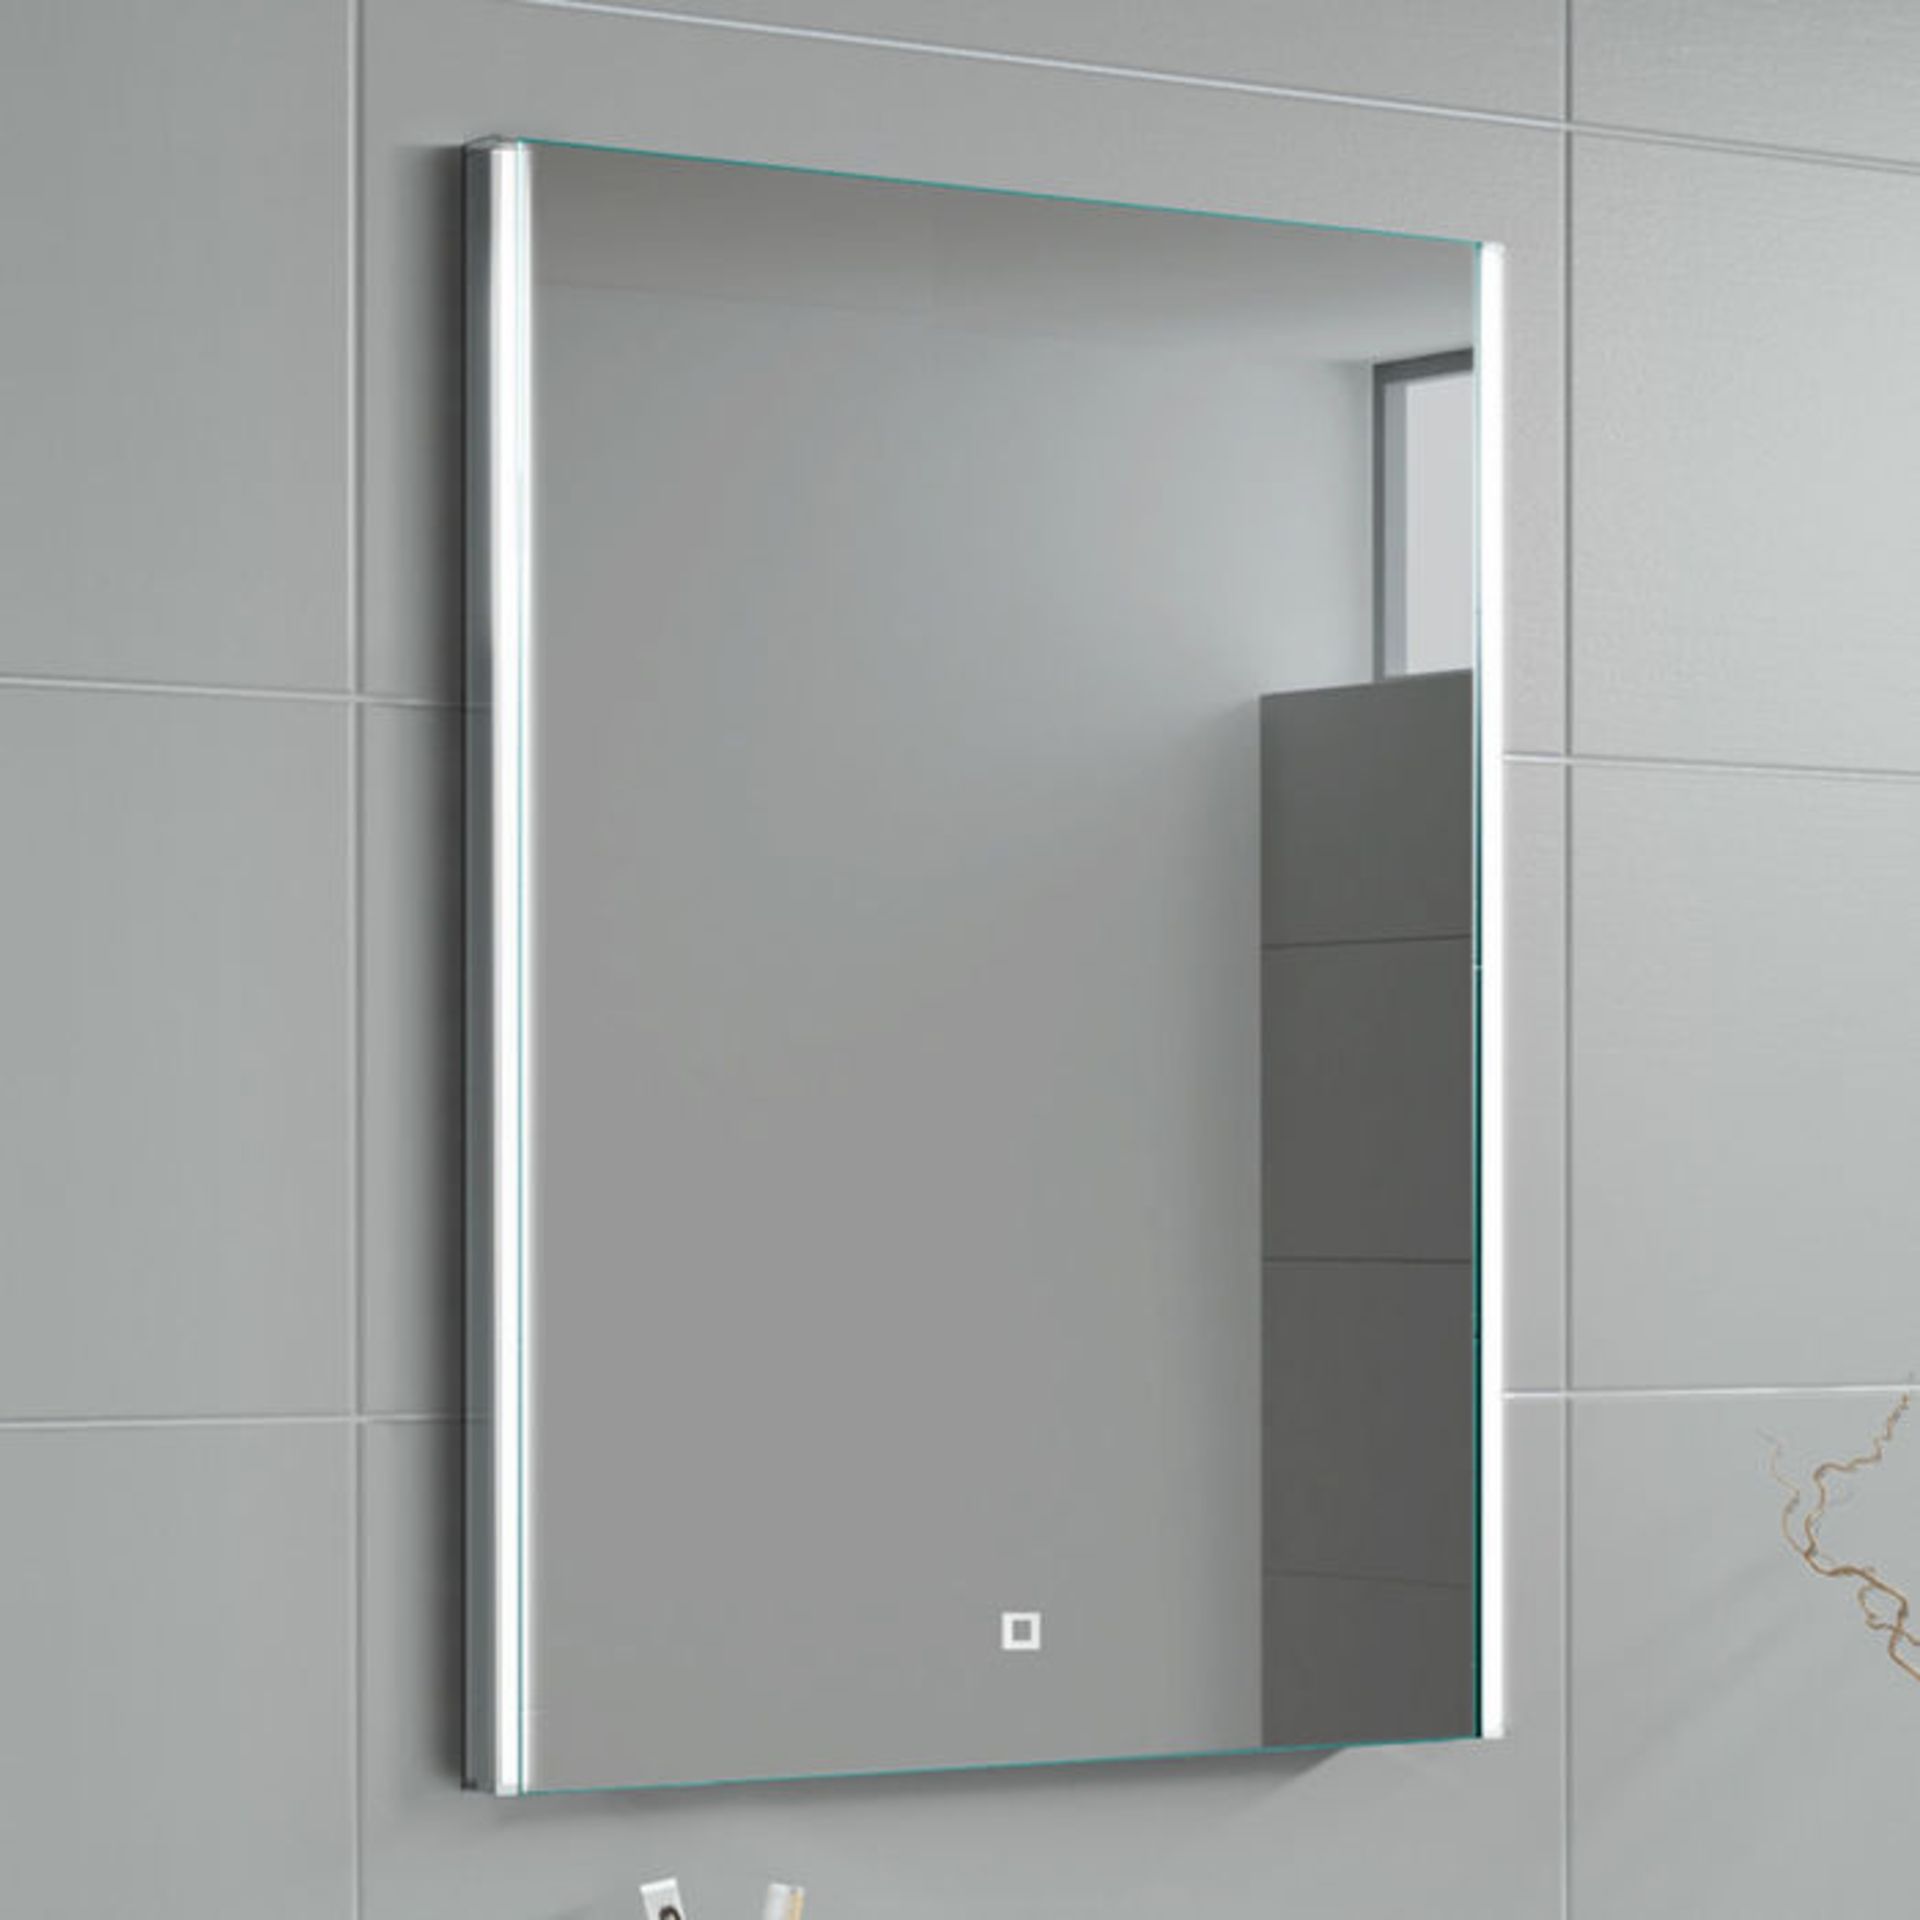 (T212) 700x500mm Denver Illuminated LED Mirror - Switch Control. RRP £349.99.Energy efficient LED - Image 2 of 2